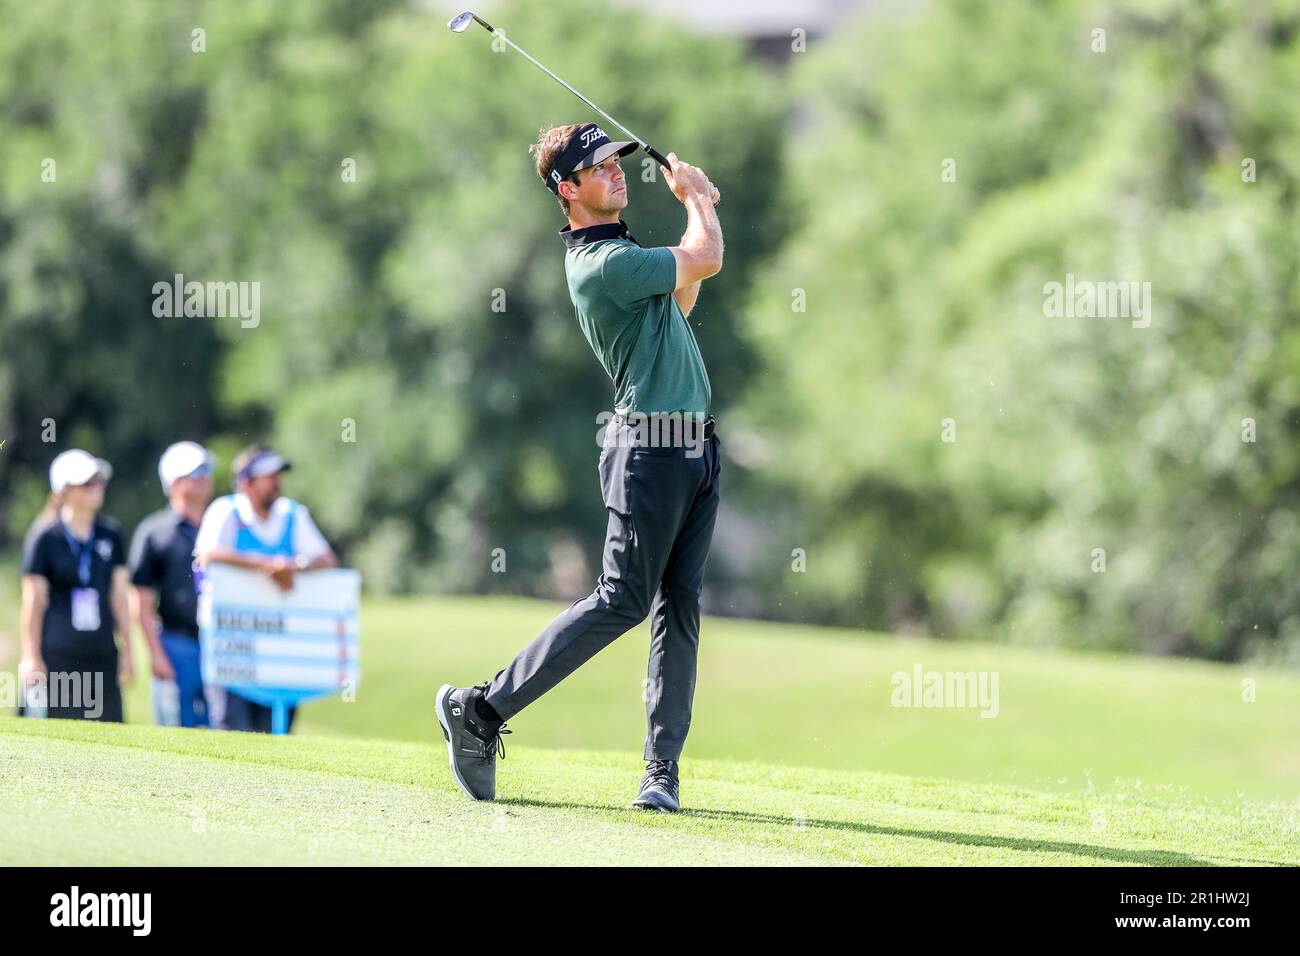 May 13, 2023: Trevor Cone hits an approach shot on the 3rd hole during the third round of the AT&T Byron Nelson golf tournament at TPC Craig Ranch in McKinney, TX. Gray Siegel/CSM Stock Photo